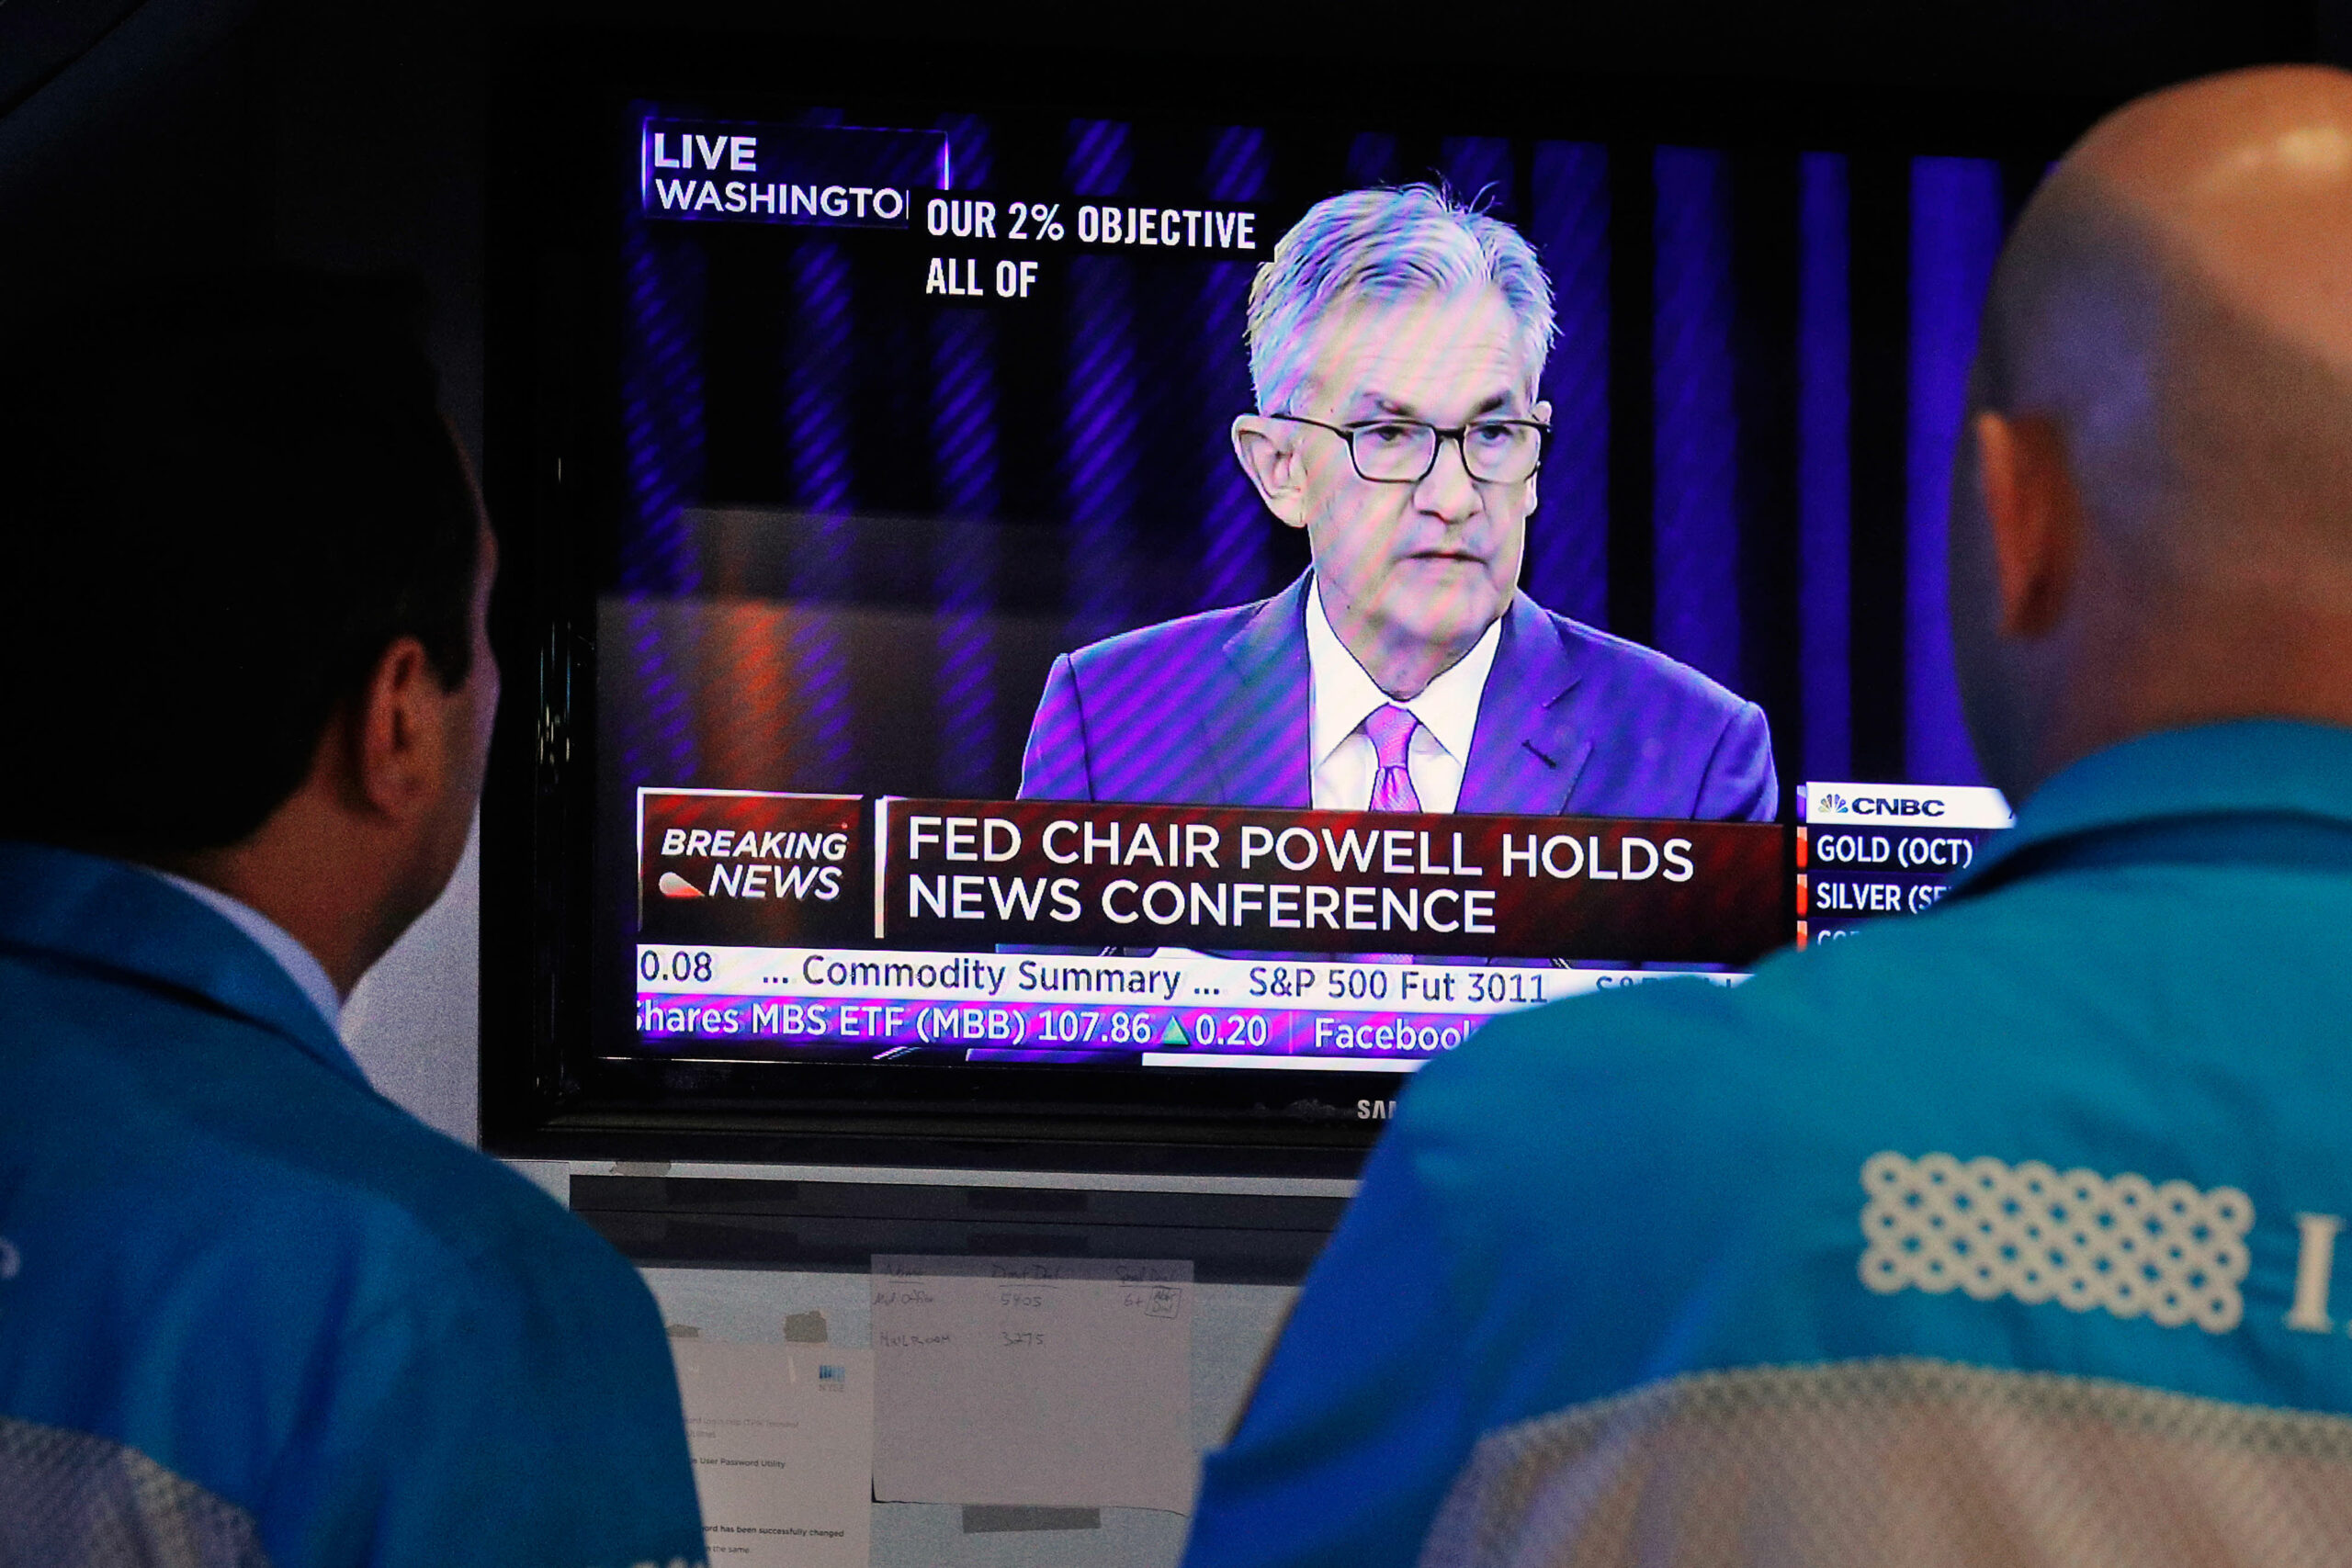 Powell’s Fed comments reinforced Cramer’s stance on quality companies